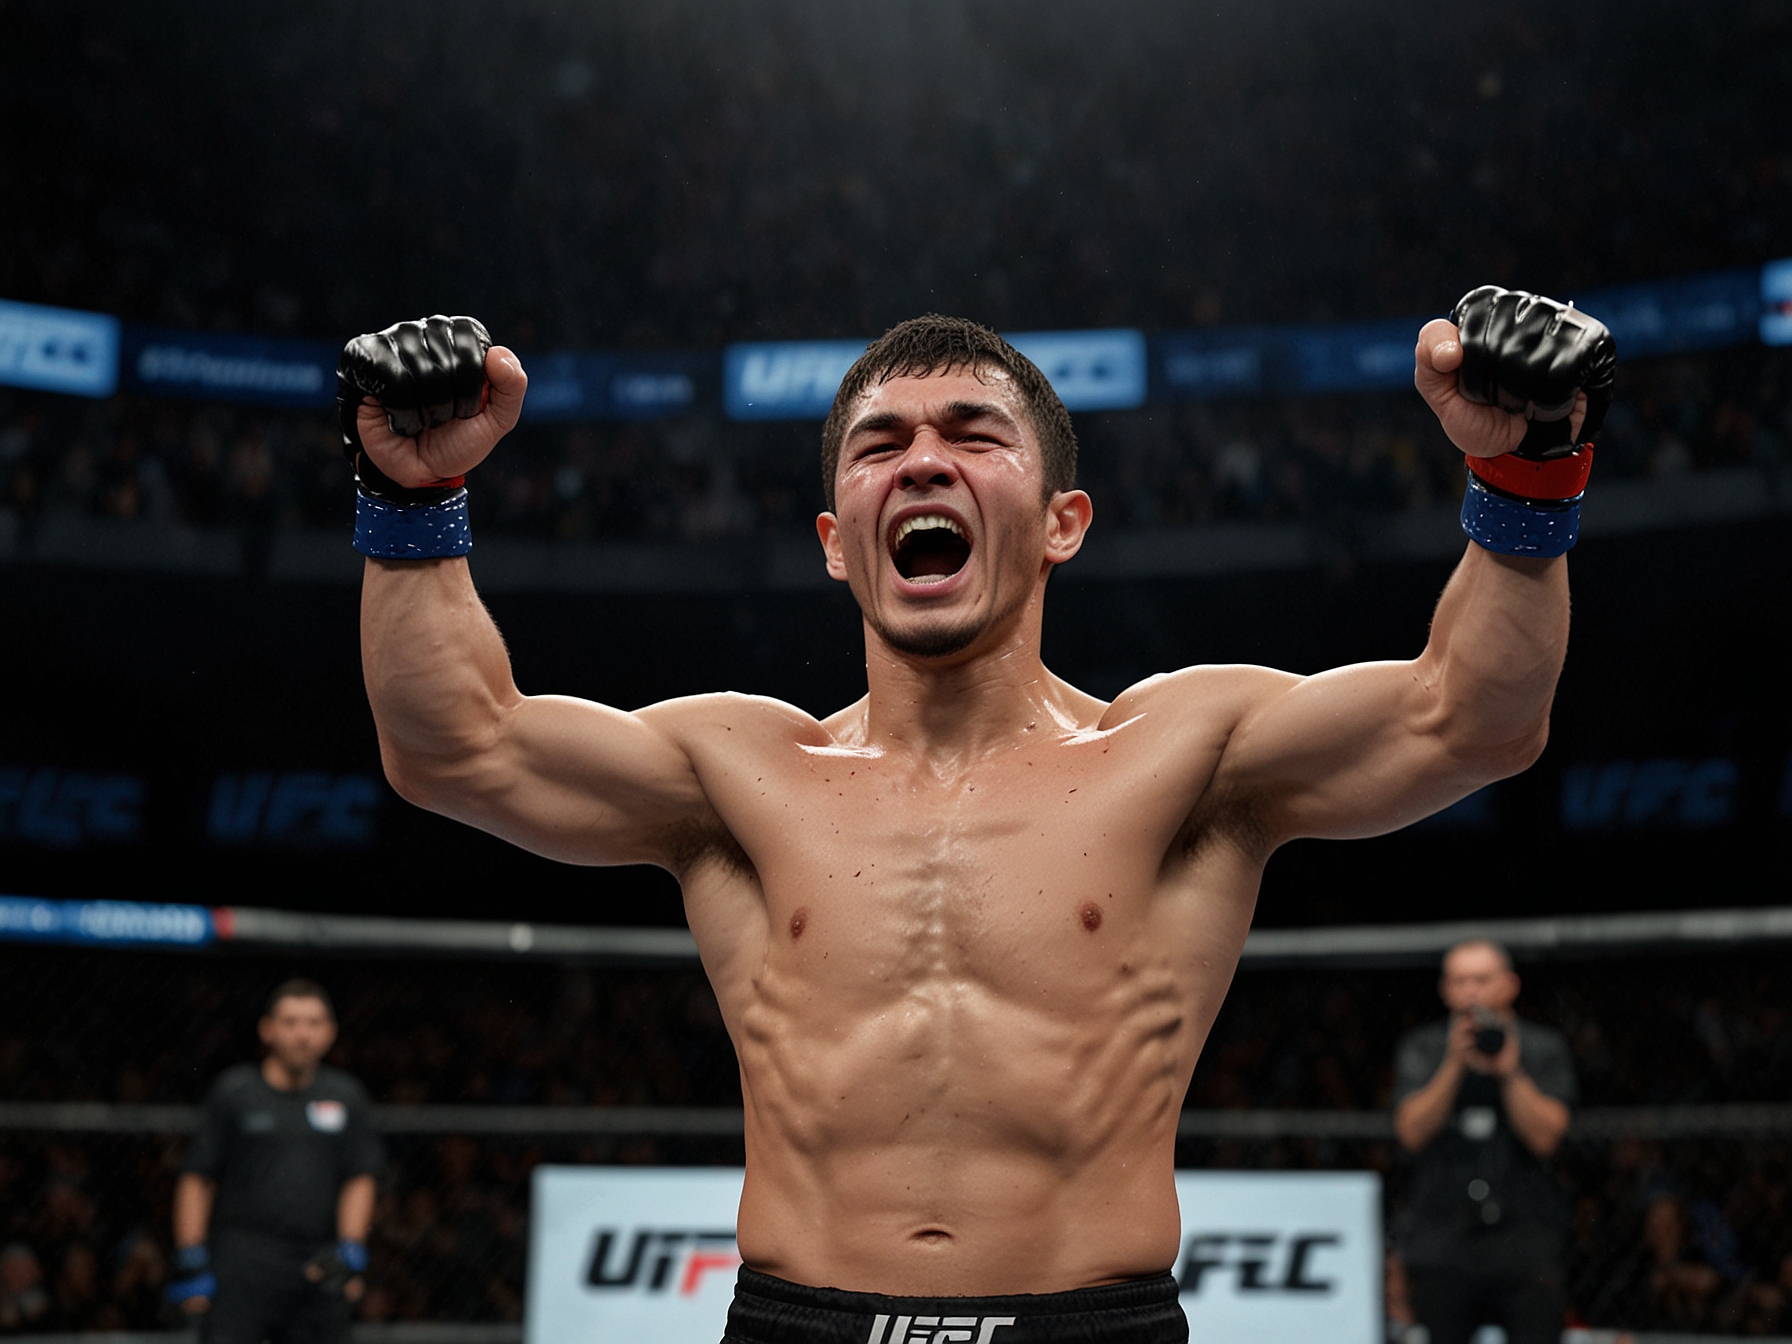 Sharaputdin Magomedov celebrating his victory in the octagon, embodying his impeccable skill and tactical acumen that have earned him back-to-back UFC wins.